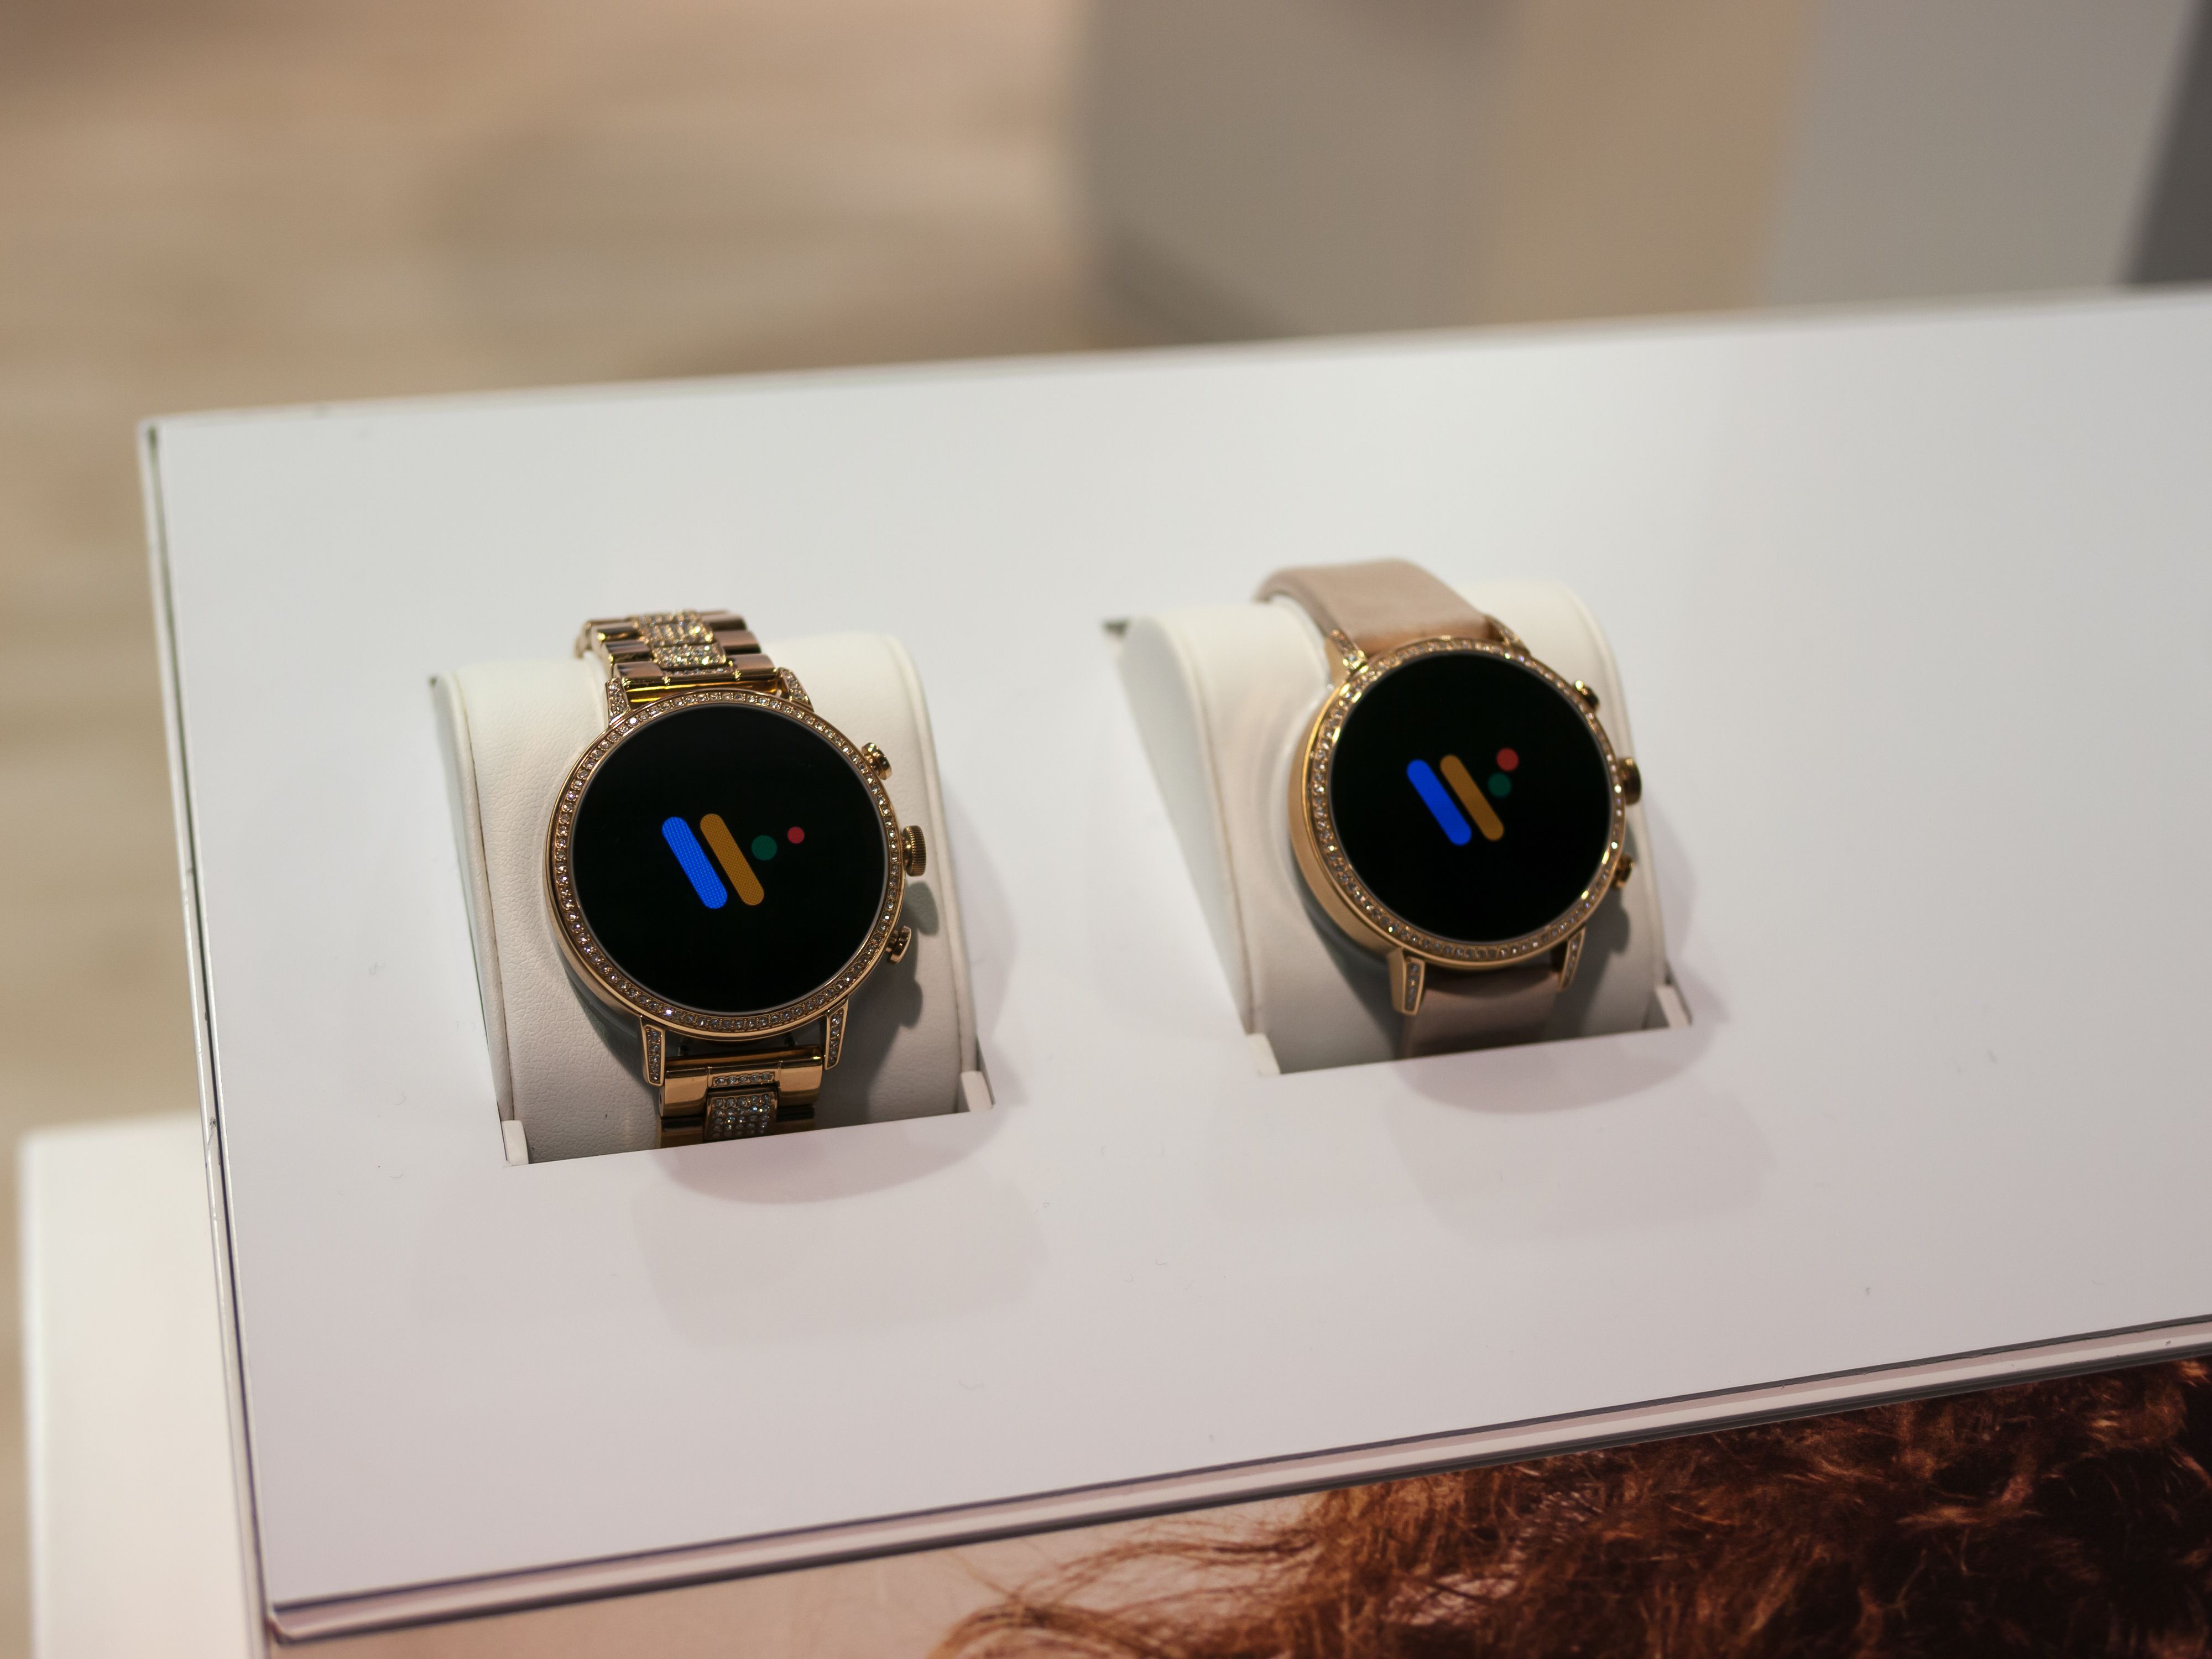 Launched in India: Fossil General 6 Hybrid Smartwatch Range with Built-in Alexa Support and SPO2 Tracking